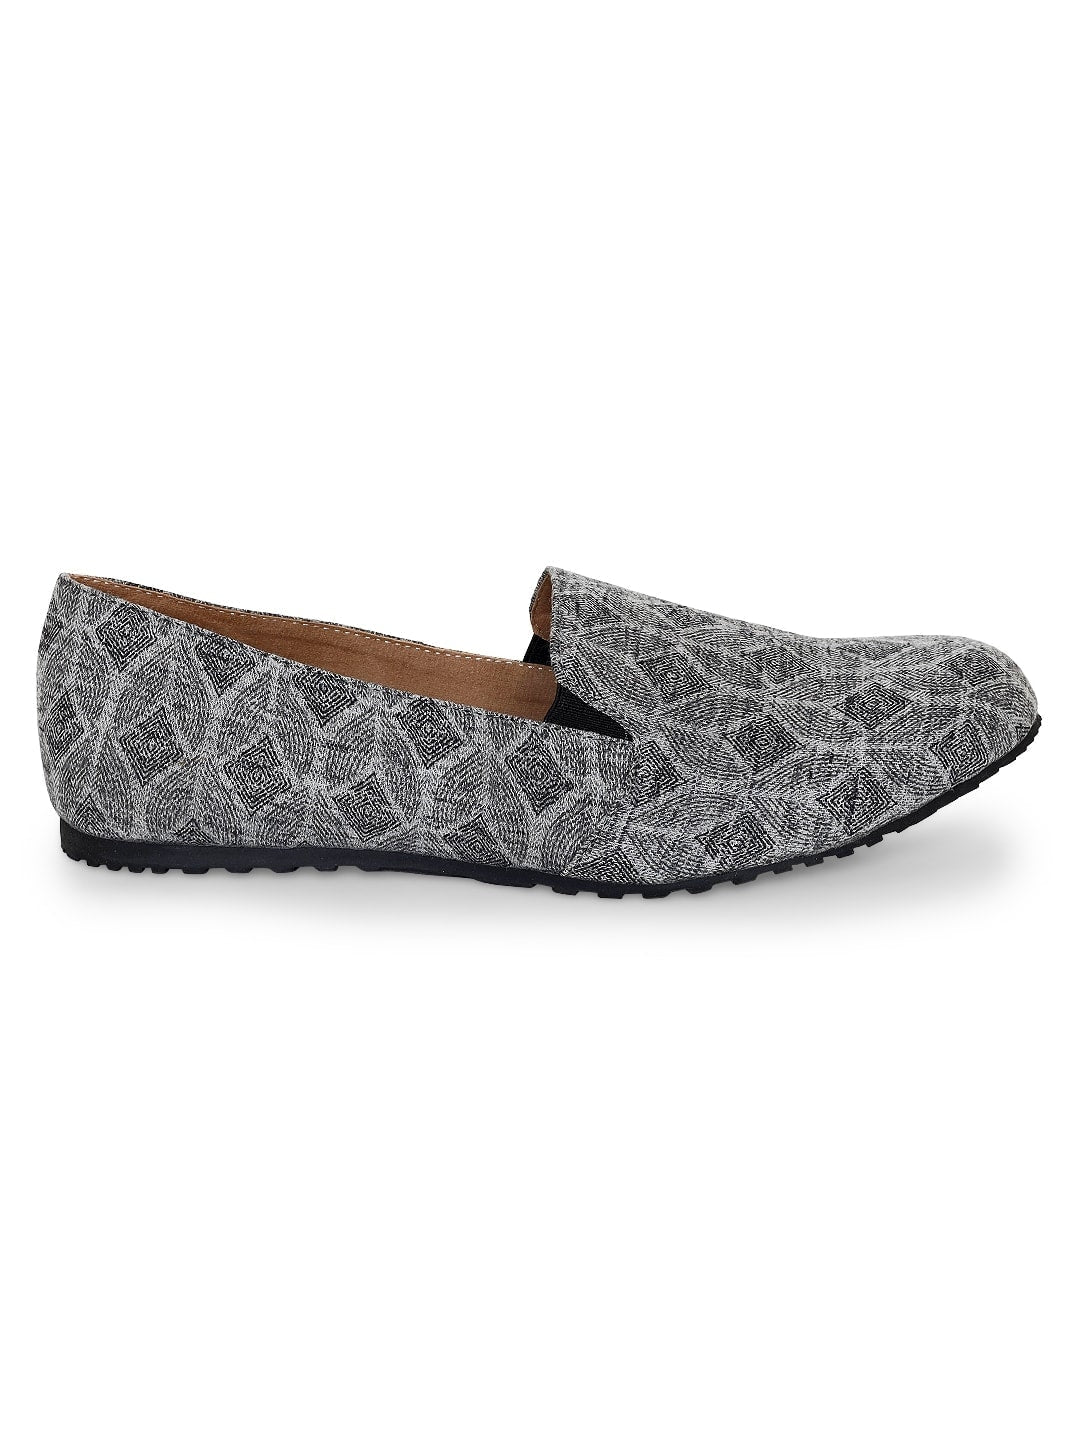 Grey Handcrafted Print Moccasin Shoes